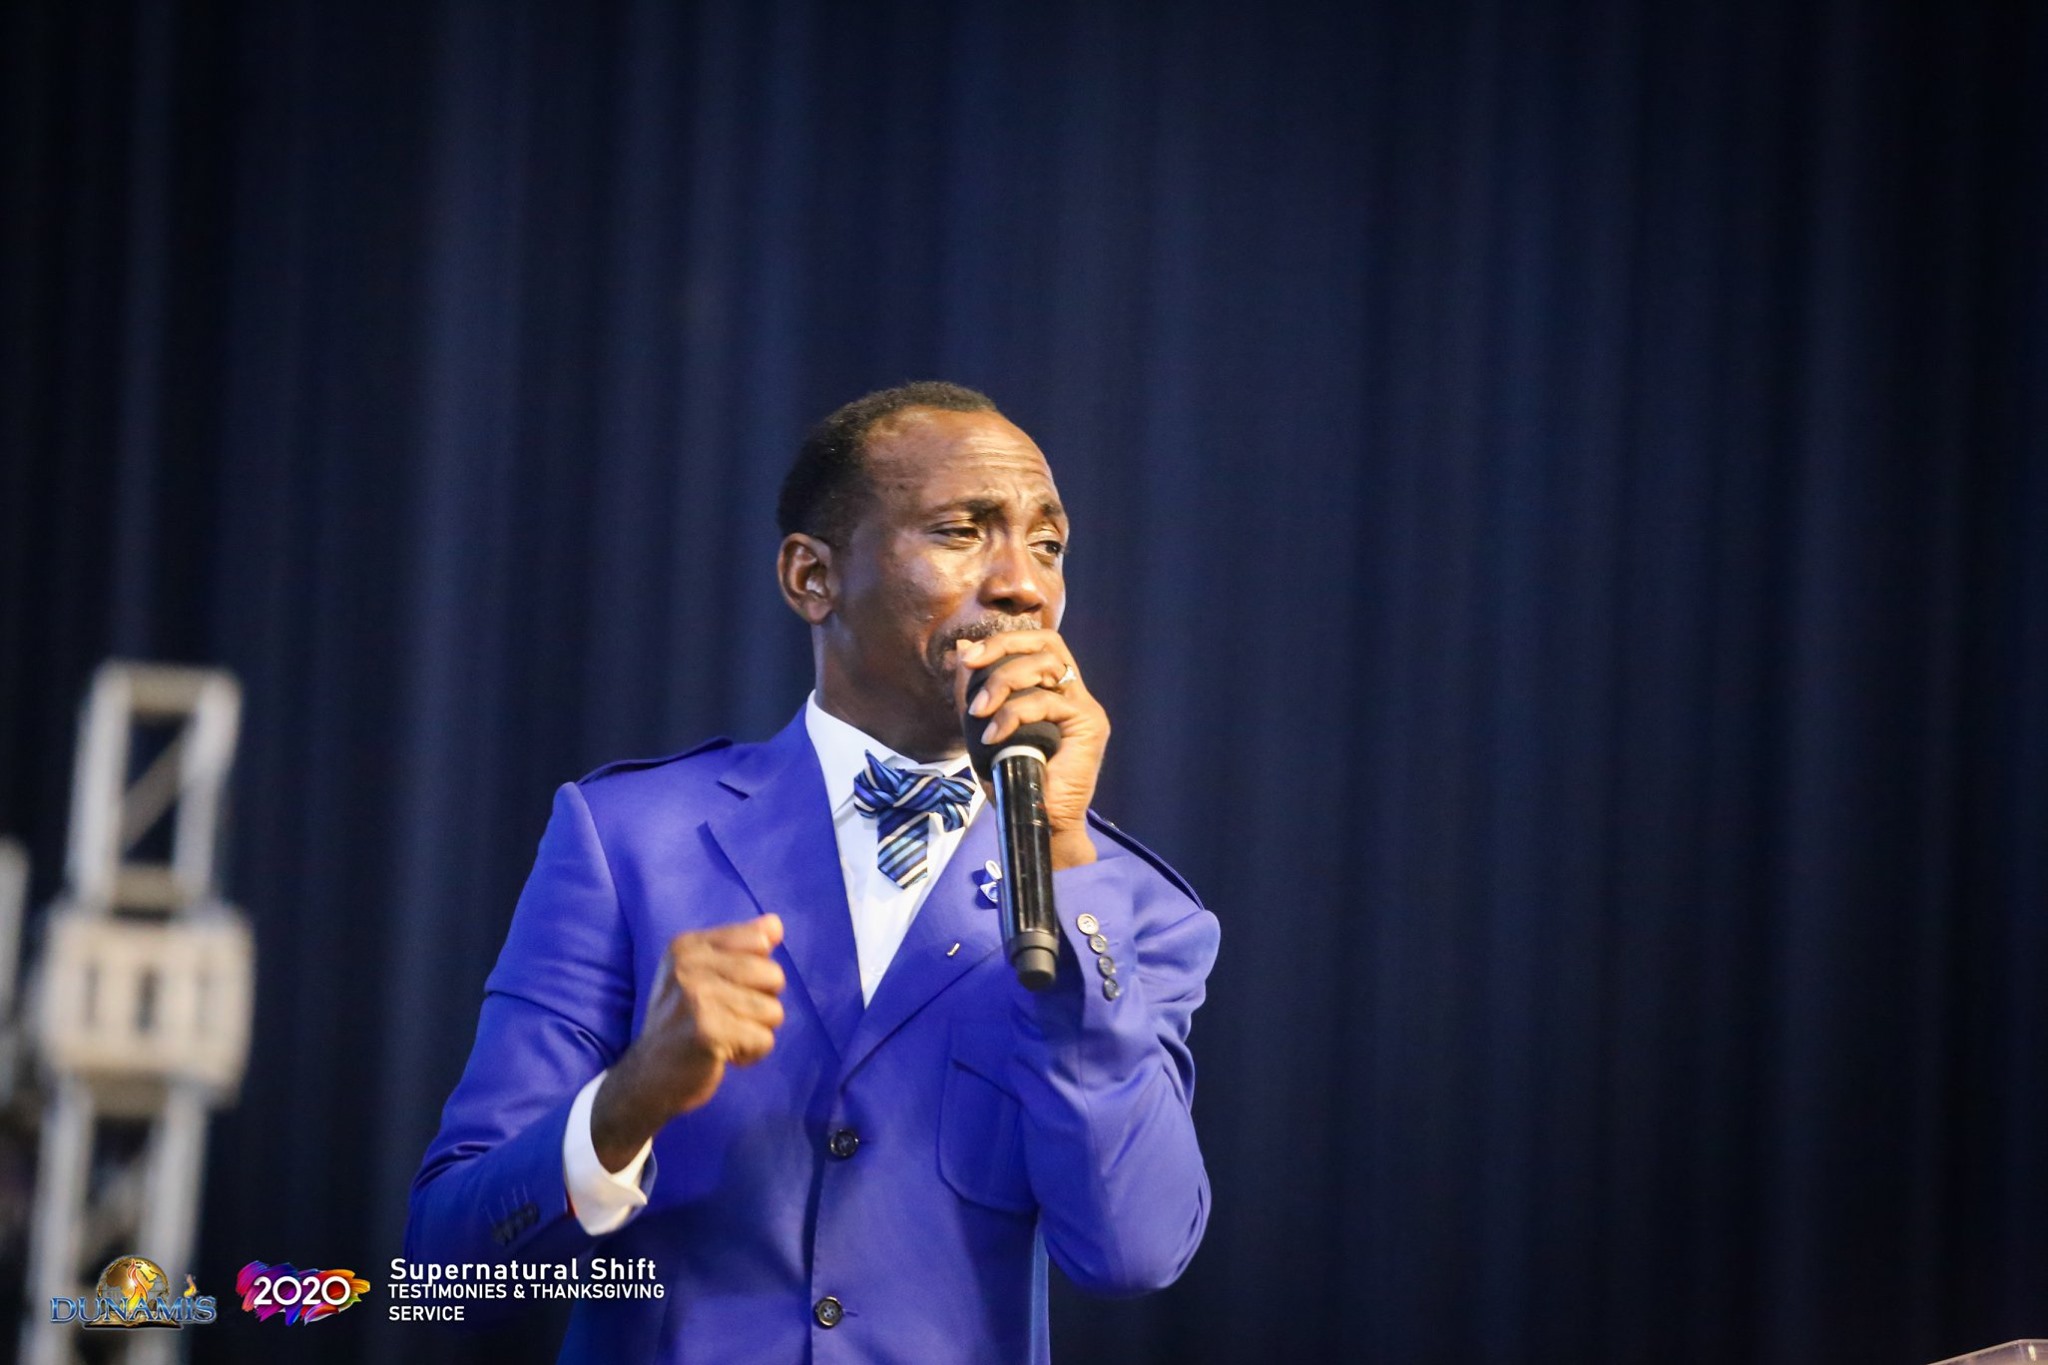 Amplifying Prayer Effect mp3 Messages [Part 1 & 2] by - Dr Paul Enenche